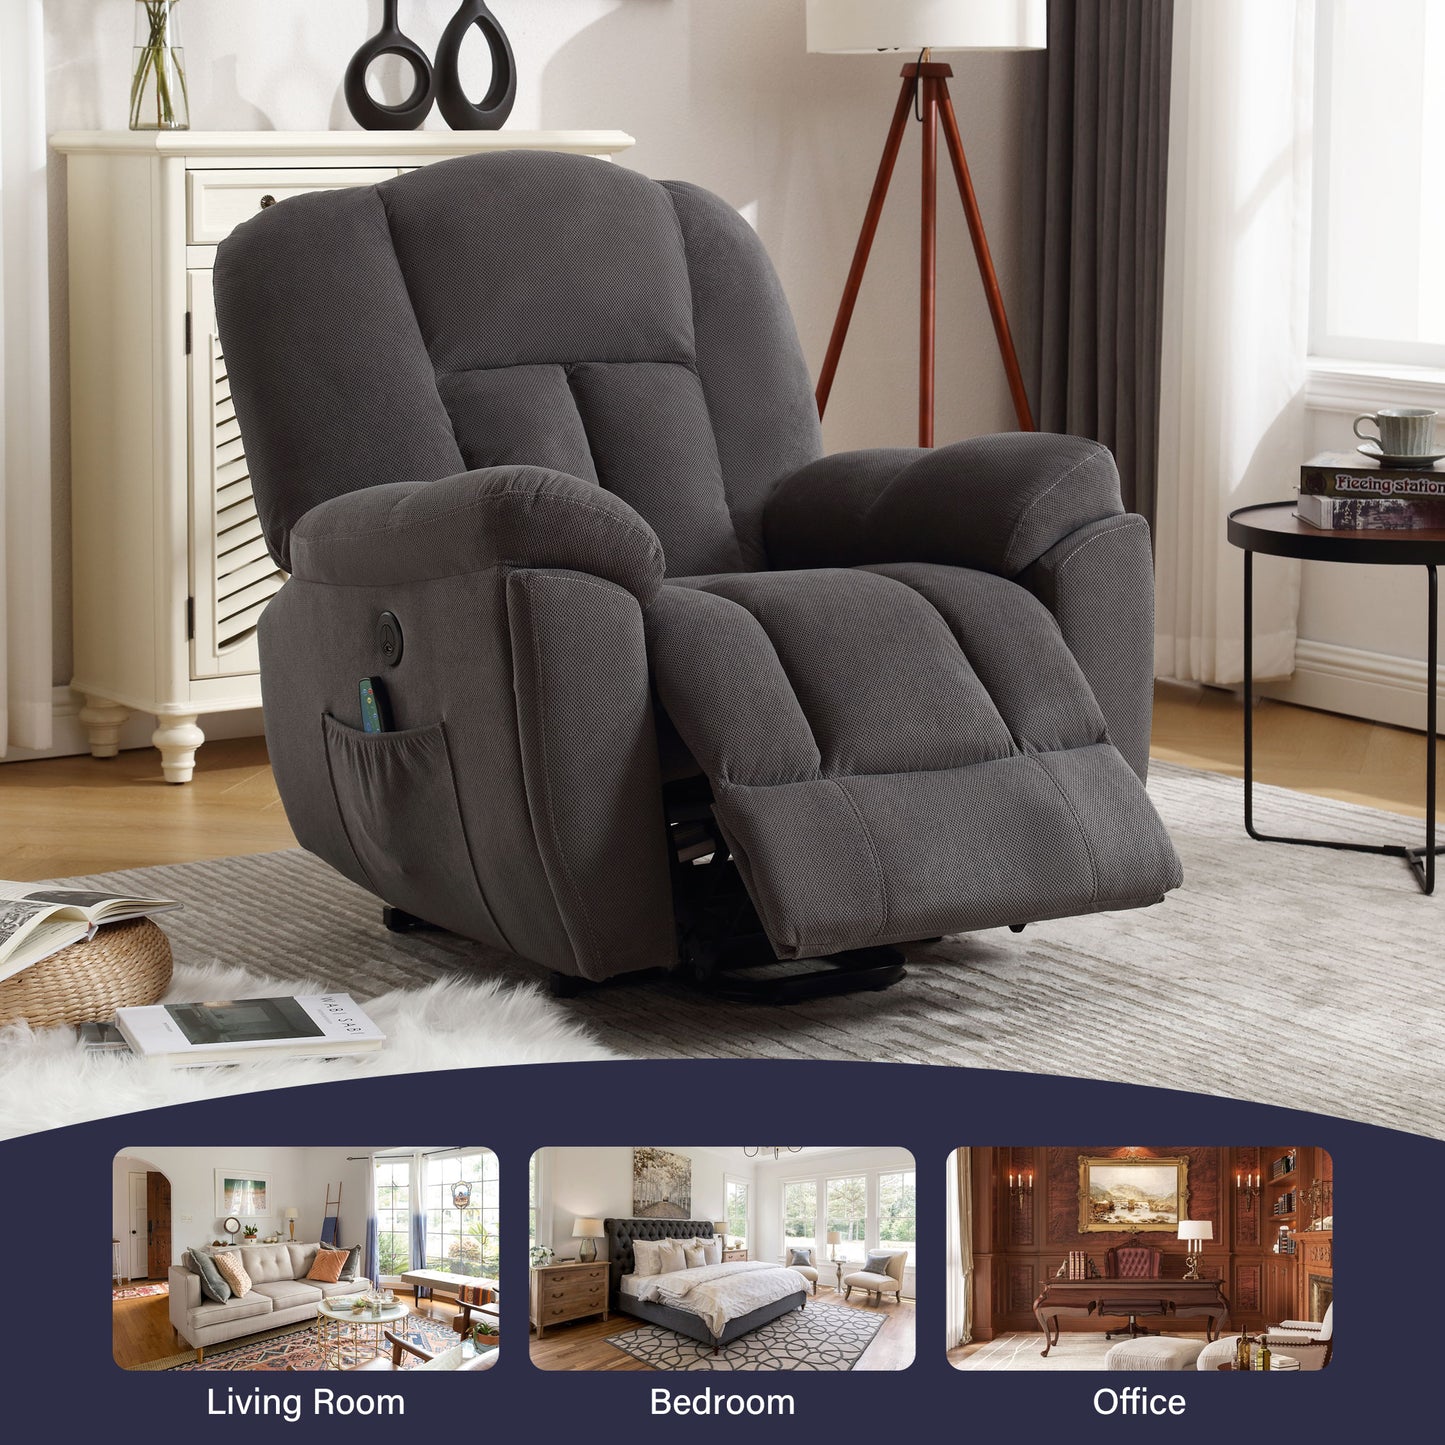 24.4" Wide Large Power Lift Recliner Chair, BTMWAY Oversize Electric Lift Recliners for Elderly with Heat and Massage, 3 Position Electric Recliner Chair for Home Use with Hidden Cup Holder, Beige